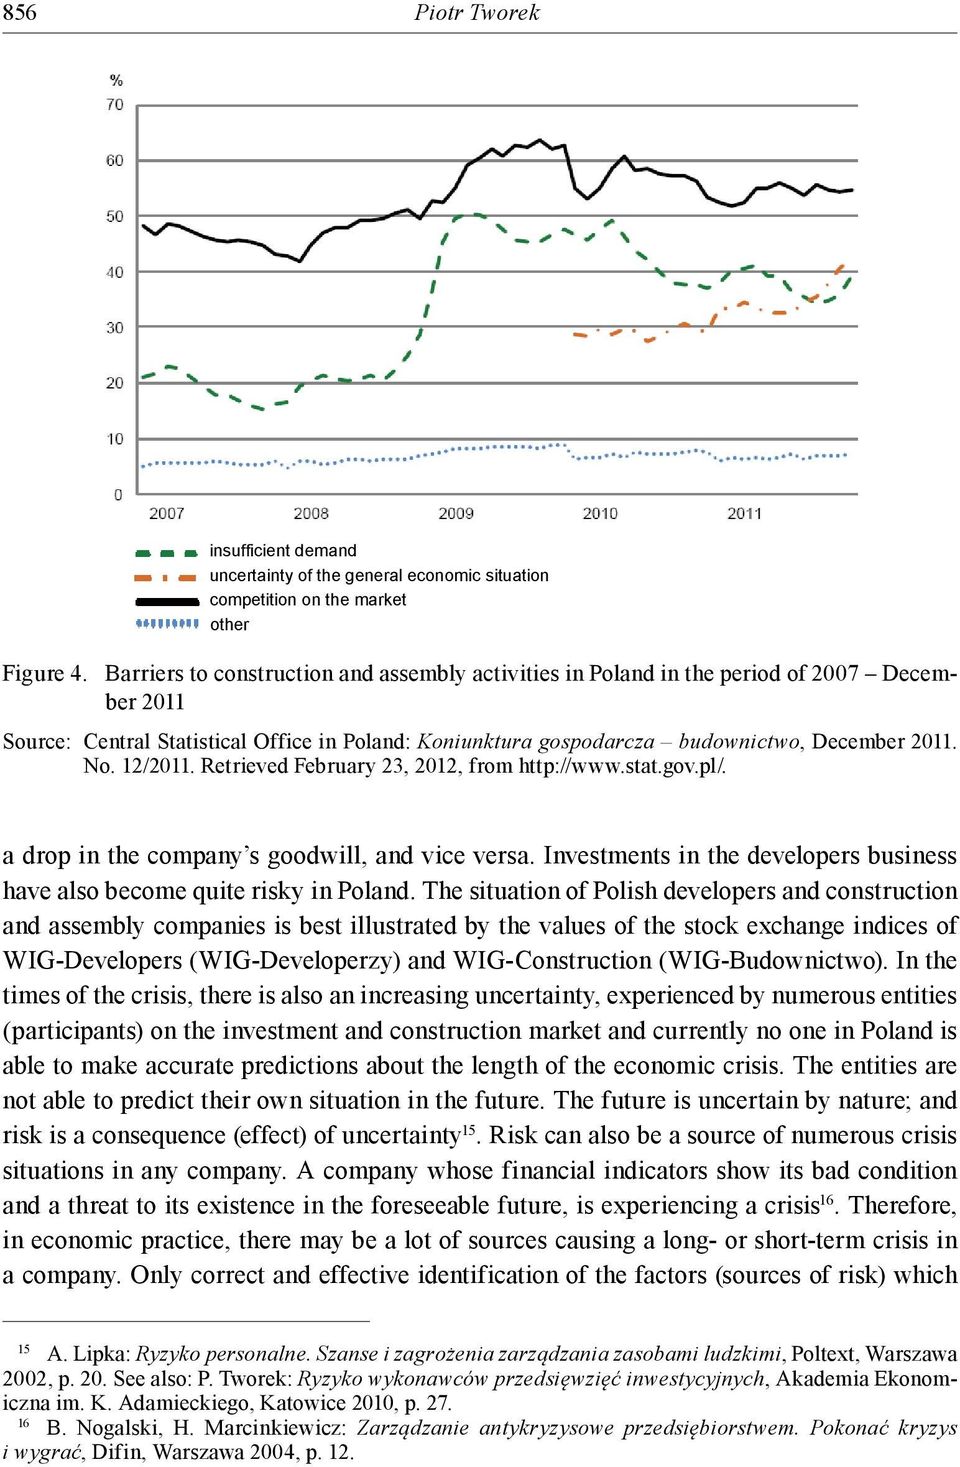 12/2011. Retrieved February 23, 2012, from http://www.stat.gov.pl/. a drop in the company s goodwill, and vice versa. Investments in the developers business have also become quite risky in Poland.